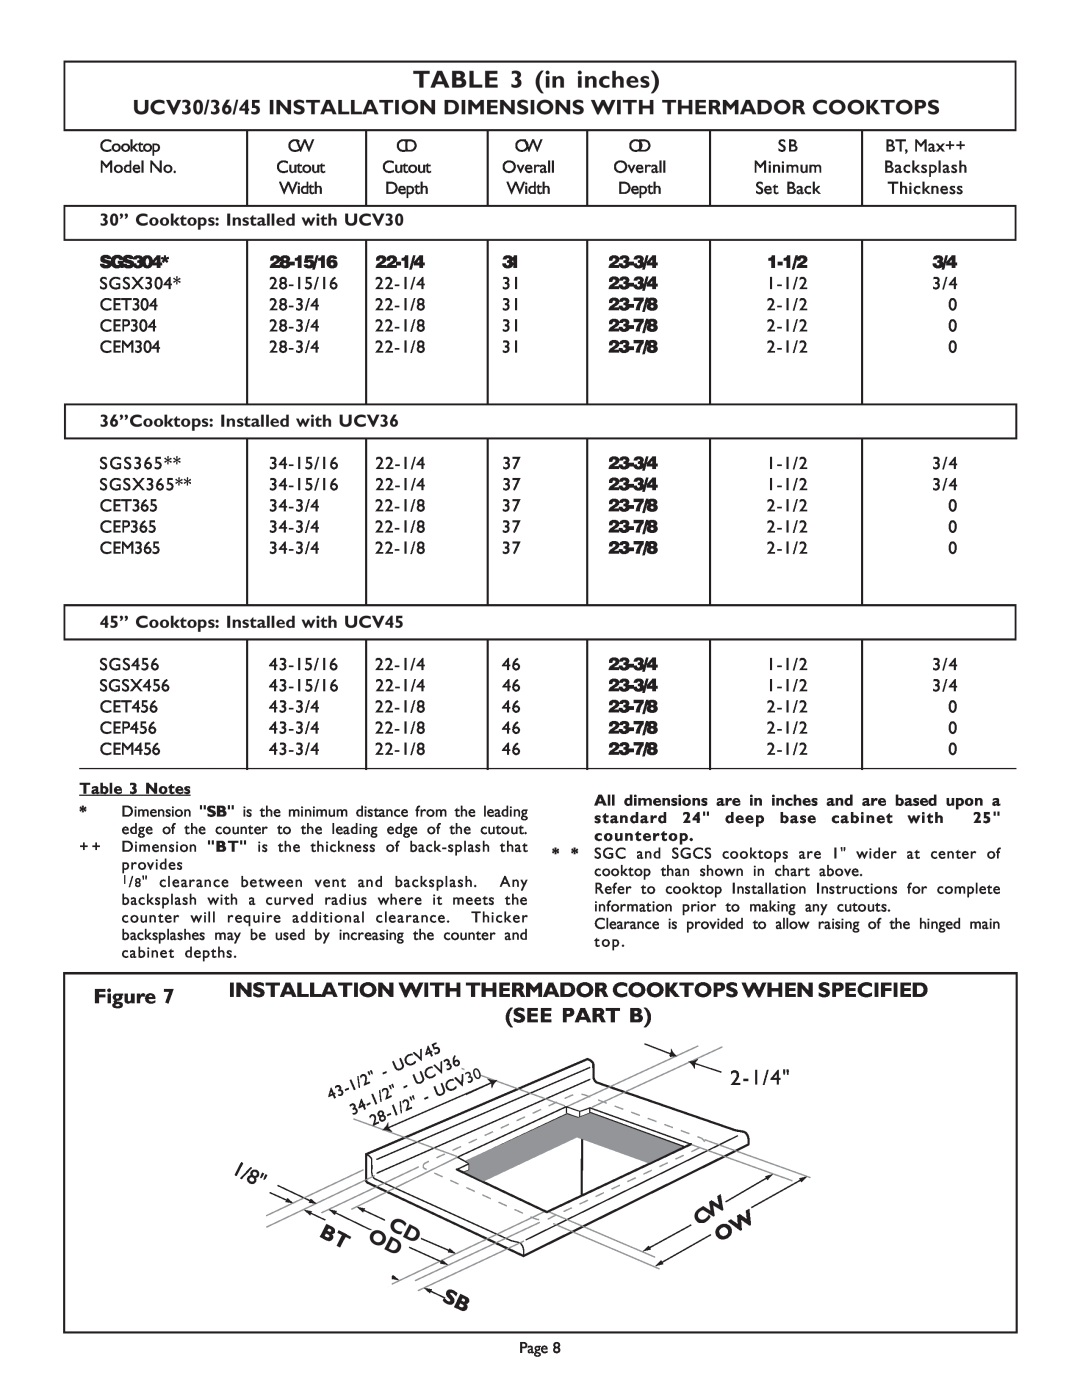 Thermador UCV36, 98 in inches, UCV30/36/45 INSTALLATION DIMENSIONS WITH THERMADOR COOKTOPS, See Part B, SGS304, 28-15/16 